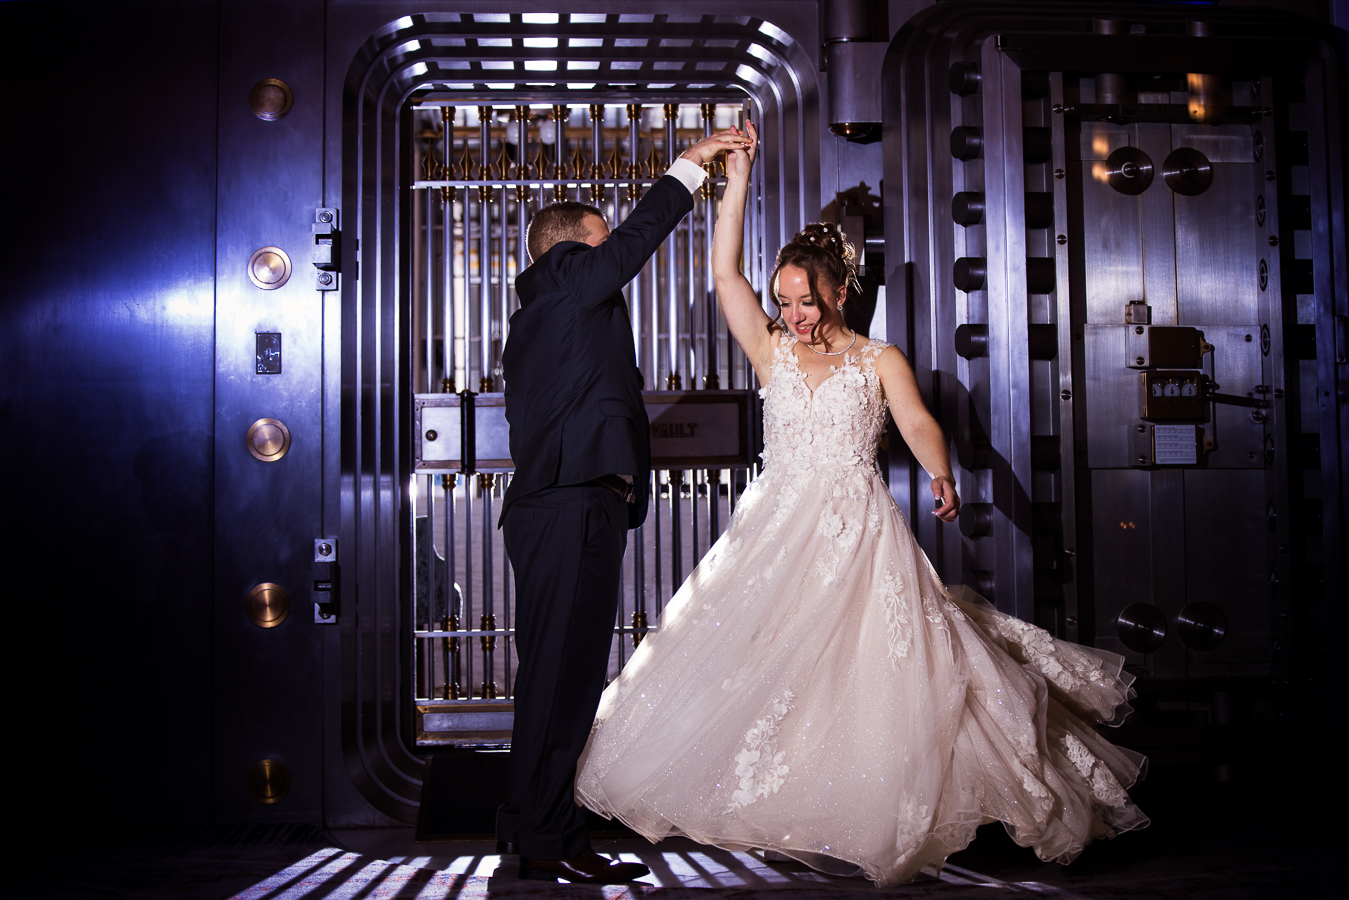 gettysburg wedding photographer, lisa rhinehart, captures this unique end of the night shot of the bride and groom as they stand in front of the historic bank vault inside of the Gettysburg hotel as the groom spins the bride around during their central pa wedding reception 